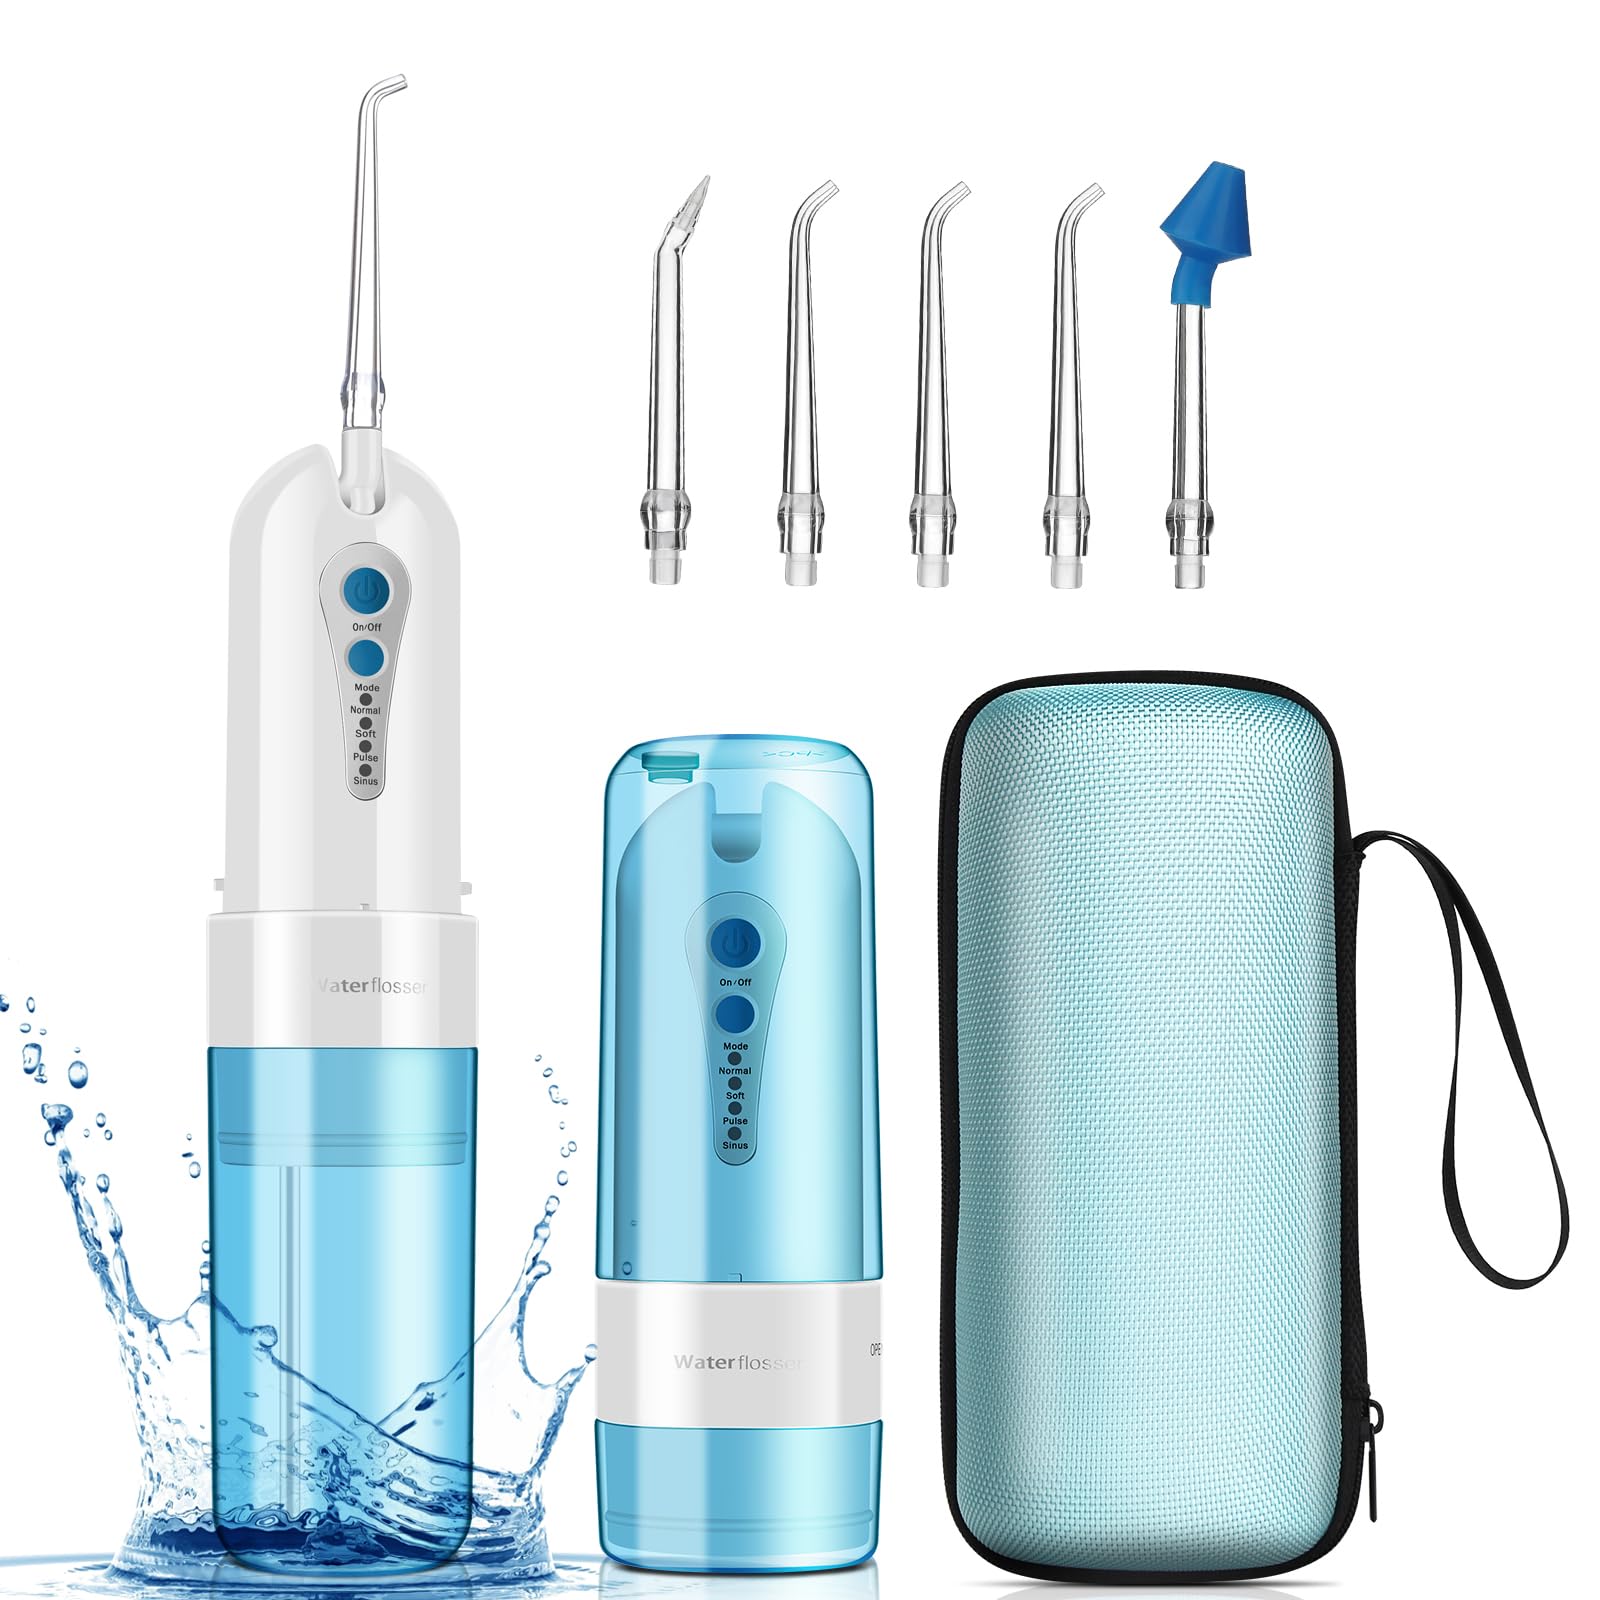 KOOVON Water Dental Flosser Cordless for Teeth, Portable Oral Irrigator Rechargeable Water Flosser for Teeth Cleaning with Travel Case,